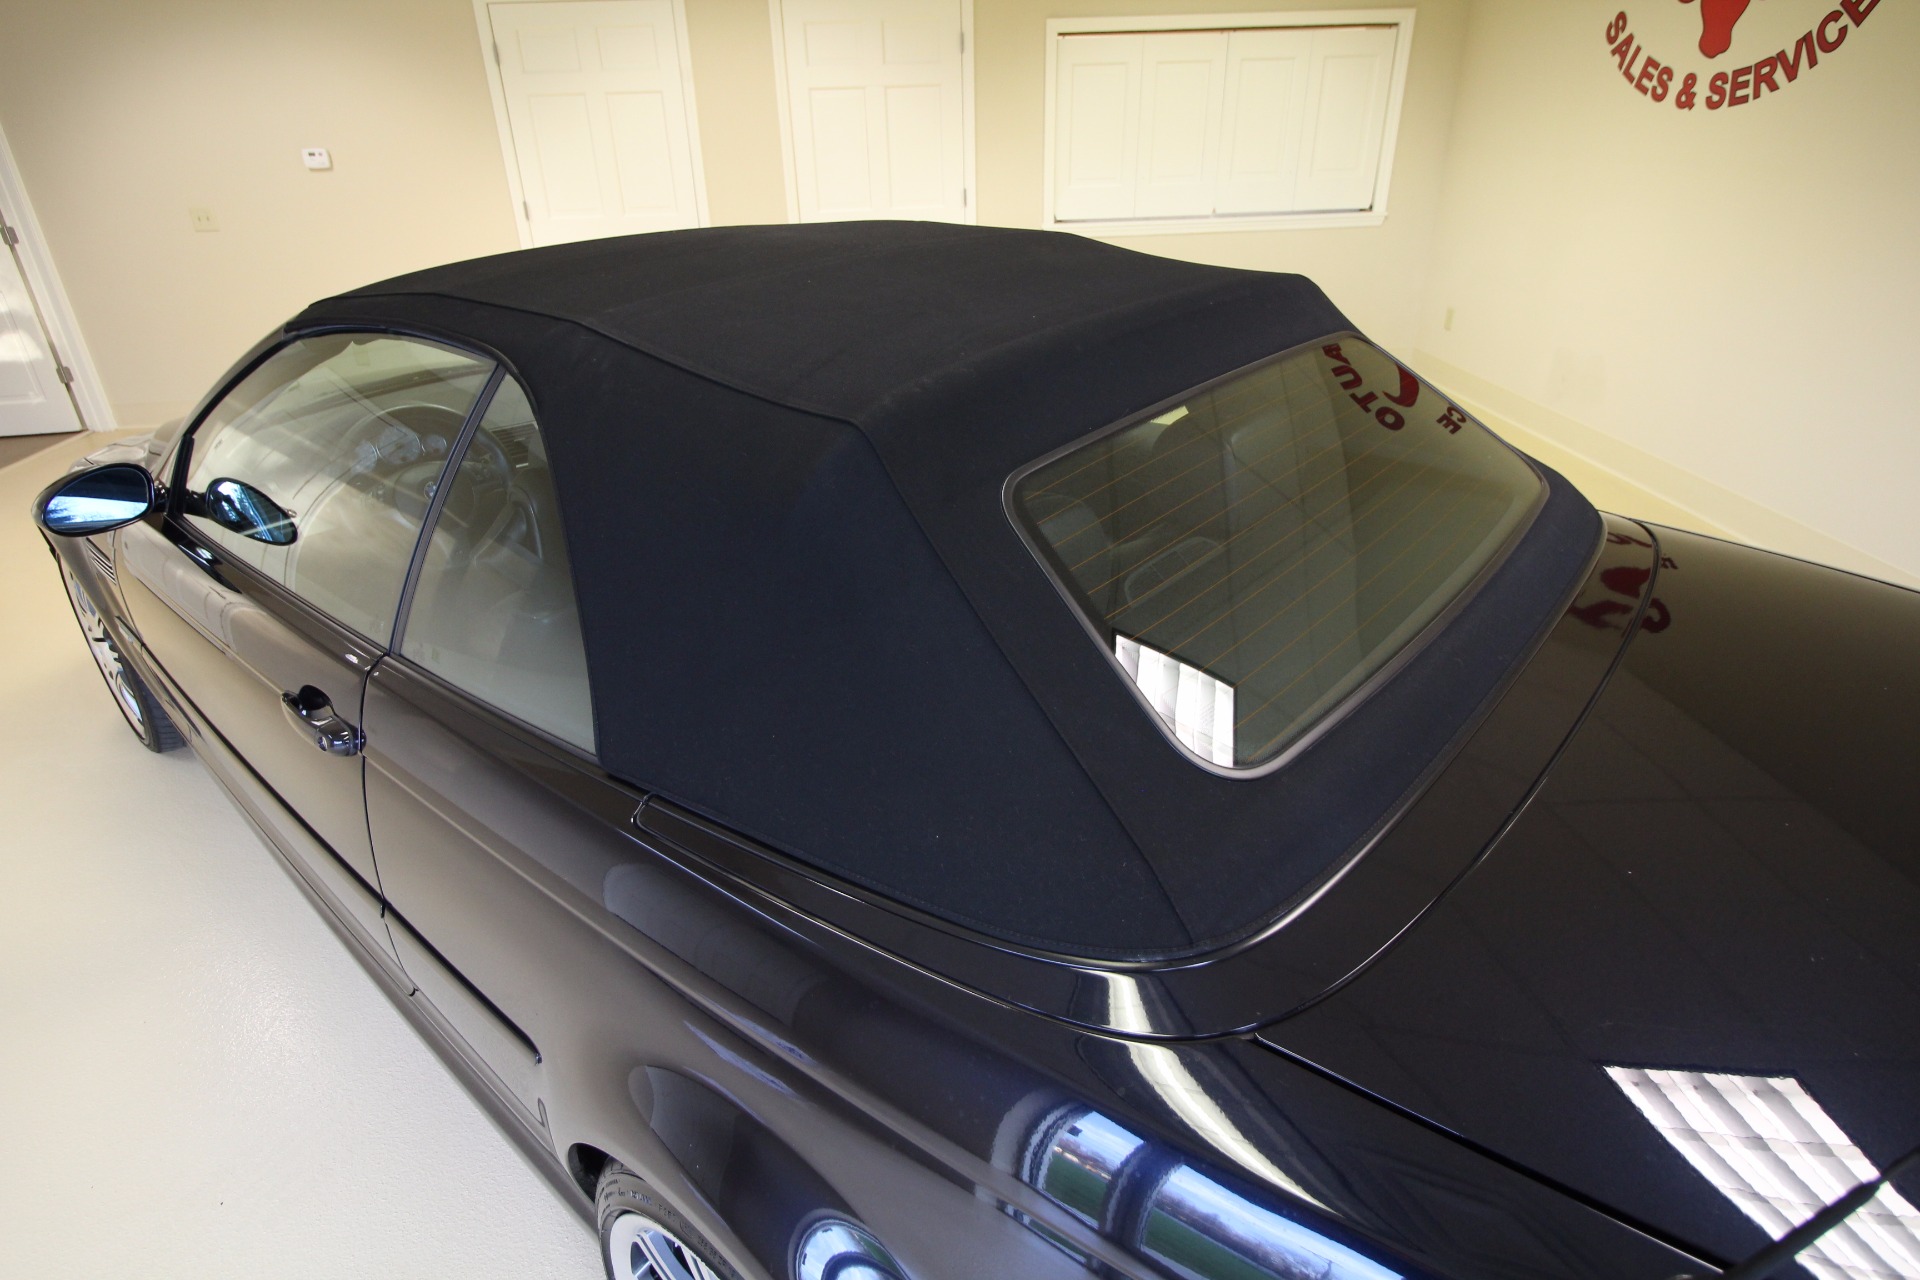 Used 2005 Carbon Black Metallic with Body Color Hard Top BMW M3 Convertible | Albany, NY